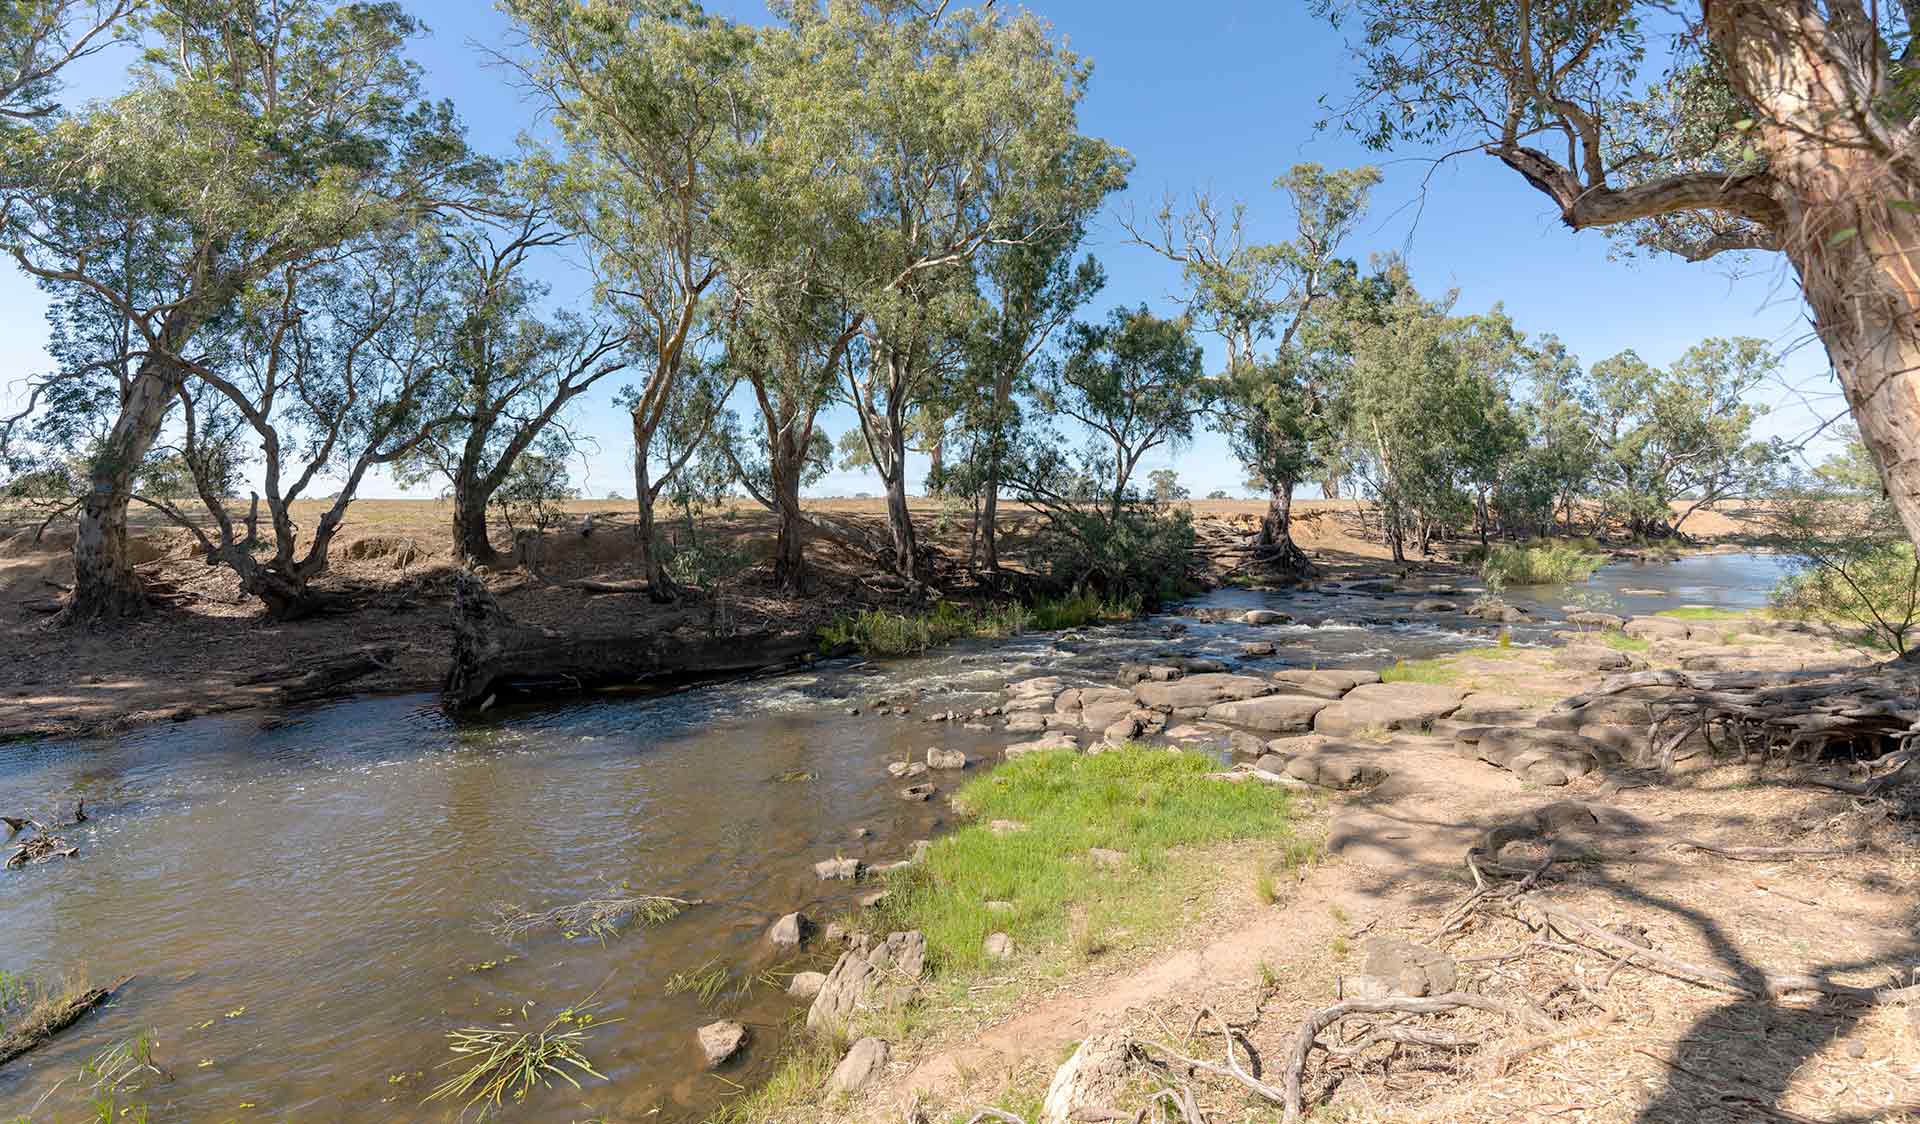 Campaspe River at Rocky Crossing in the Greater Bendigo National Park